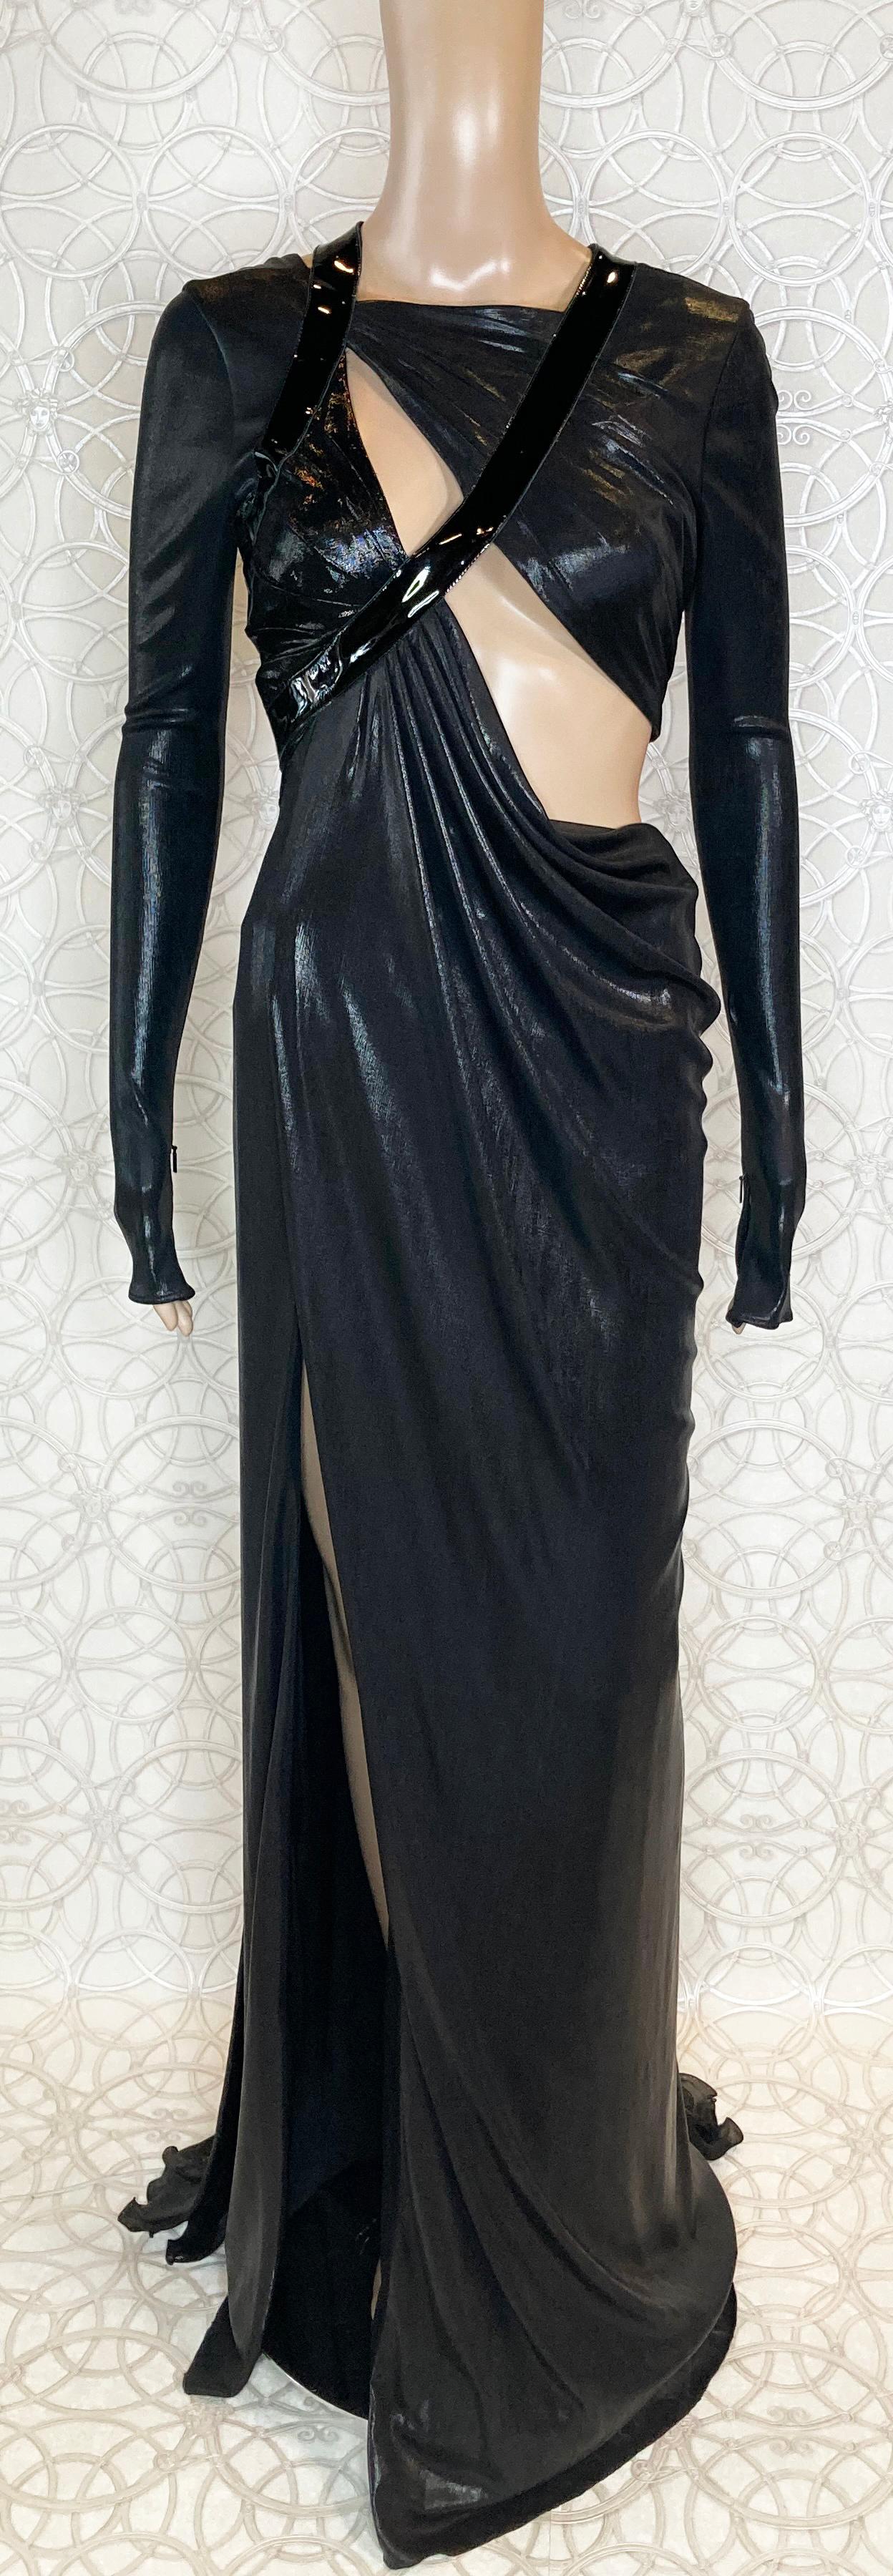 New VERSACE Hottest Black Liquid Jersey Gown With Vinyl Sleeves 1